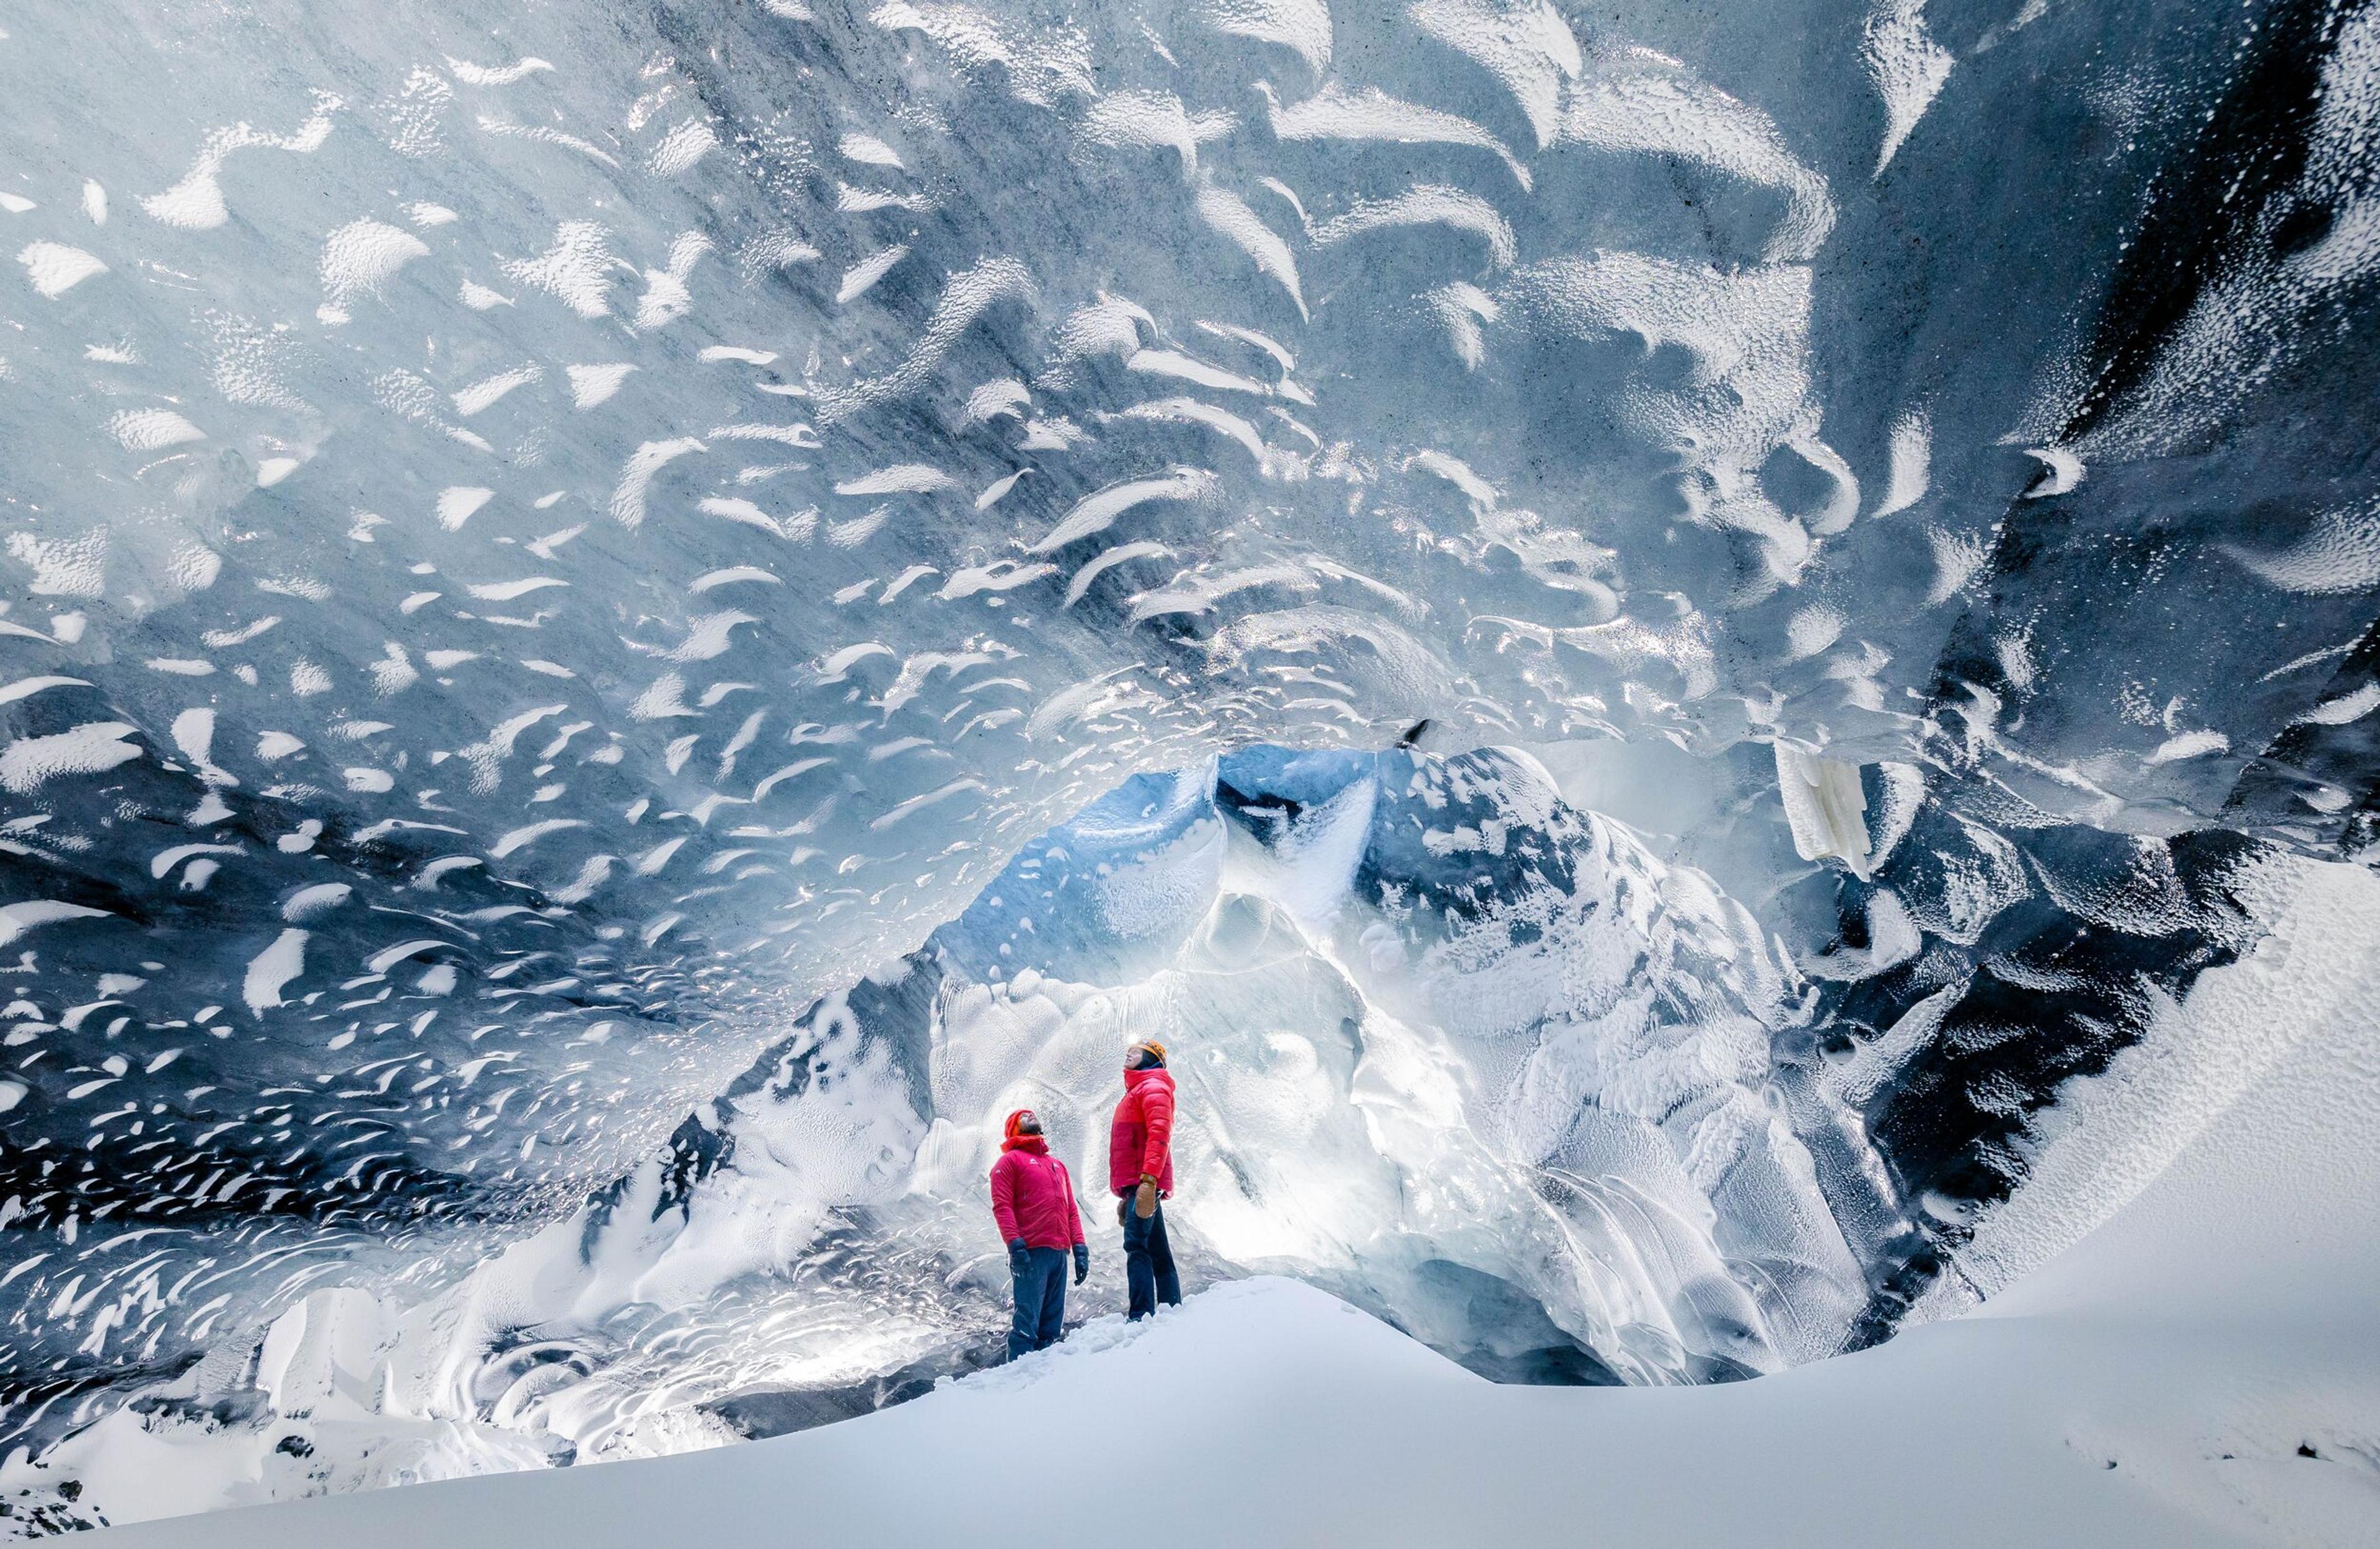 Two explorers stand inside a stunning ice cave with intricate patterns on the walls, illuminated by natural light.